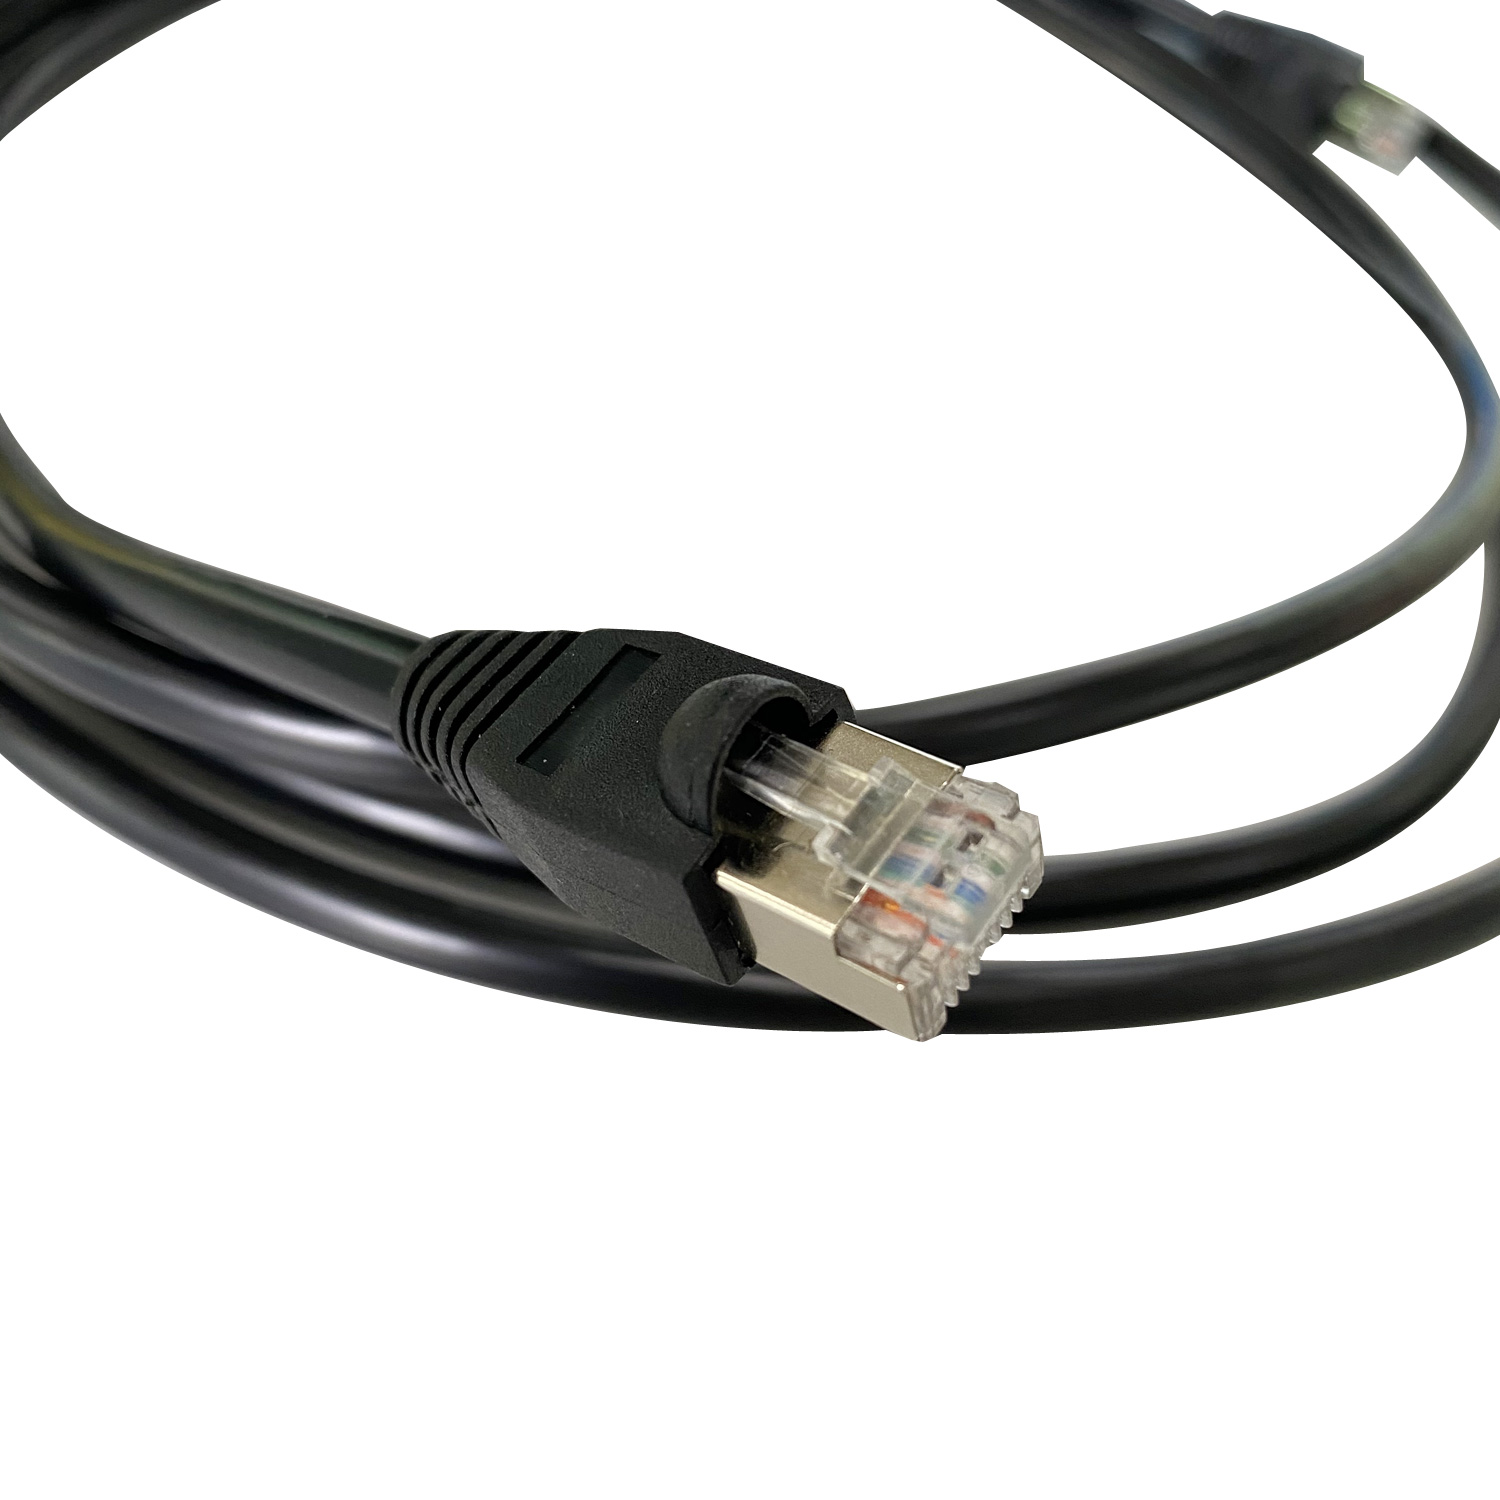 Ethernet Cable RJ45 Patch Cord LAN Cable Twisted Pair Cable